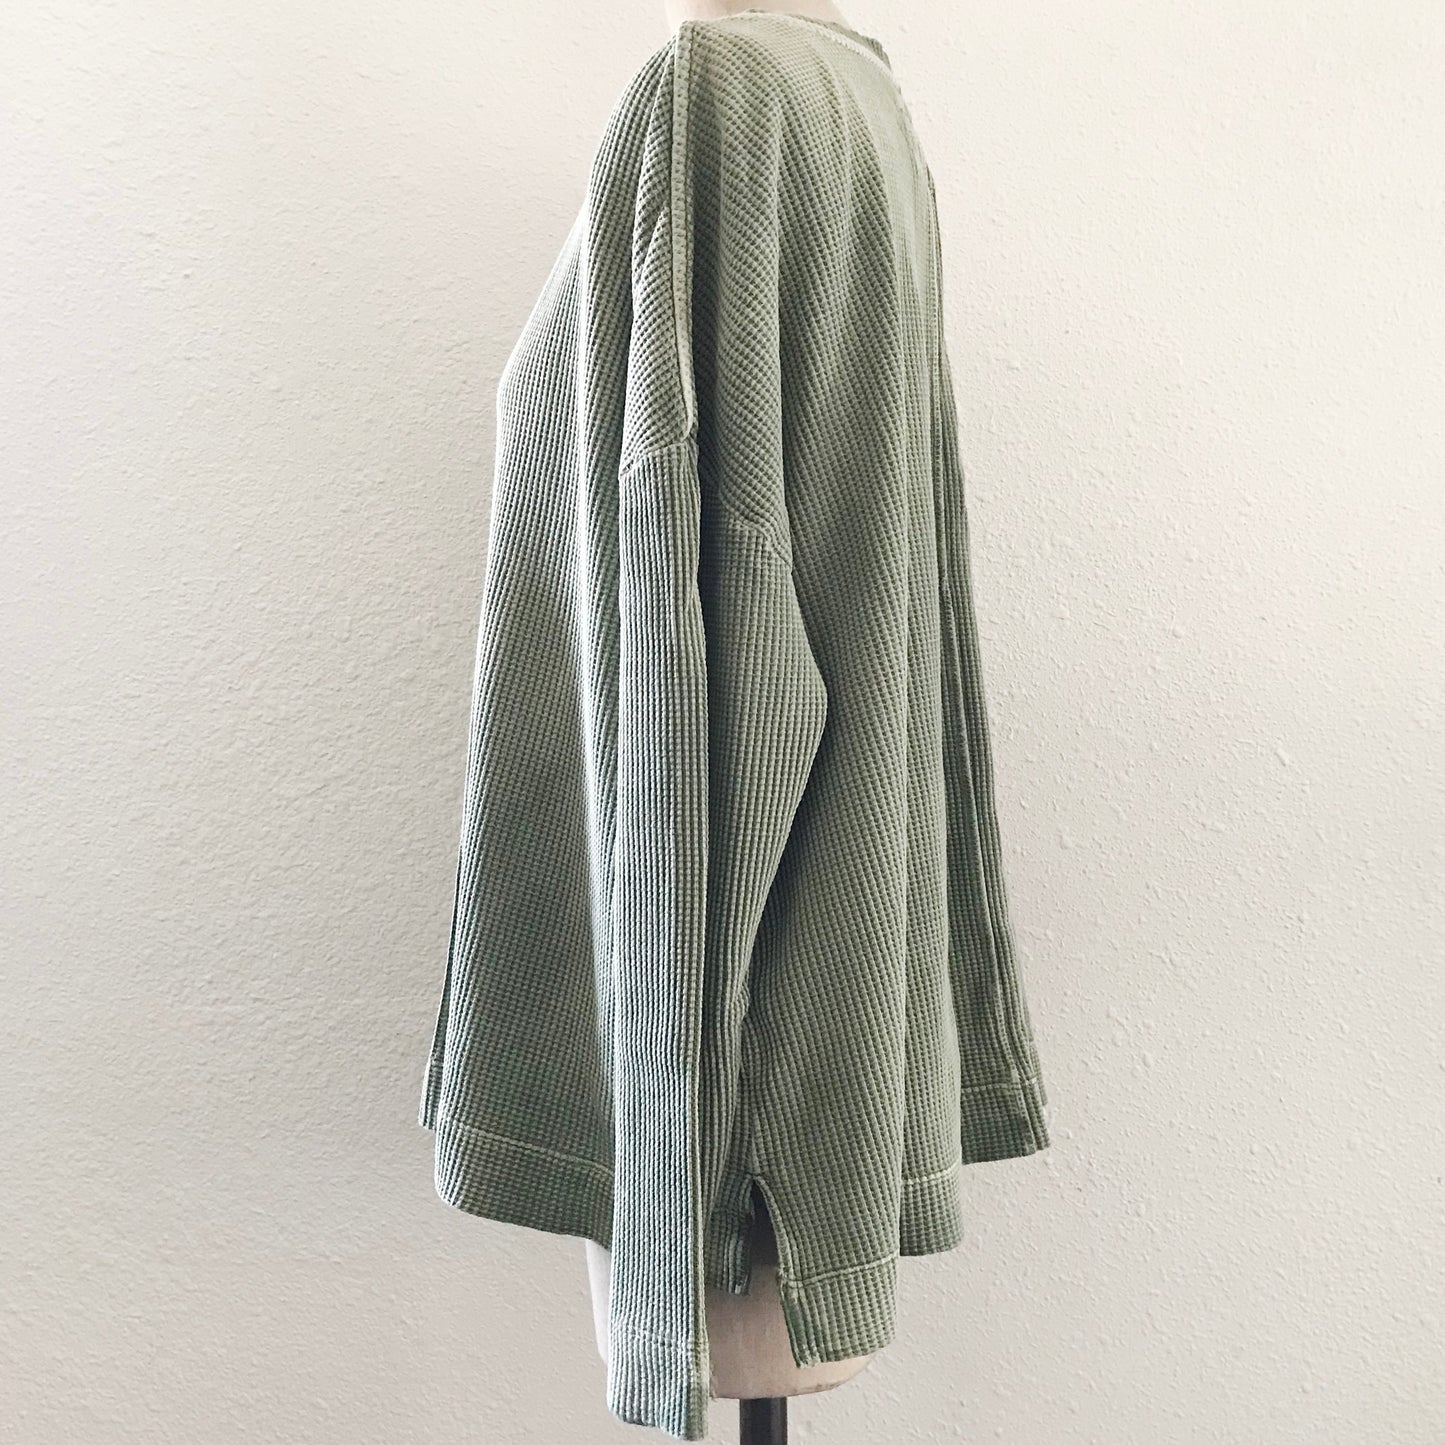 Anthropologie Green Waffle Knit Long Sleeve Top